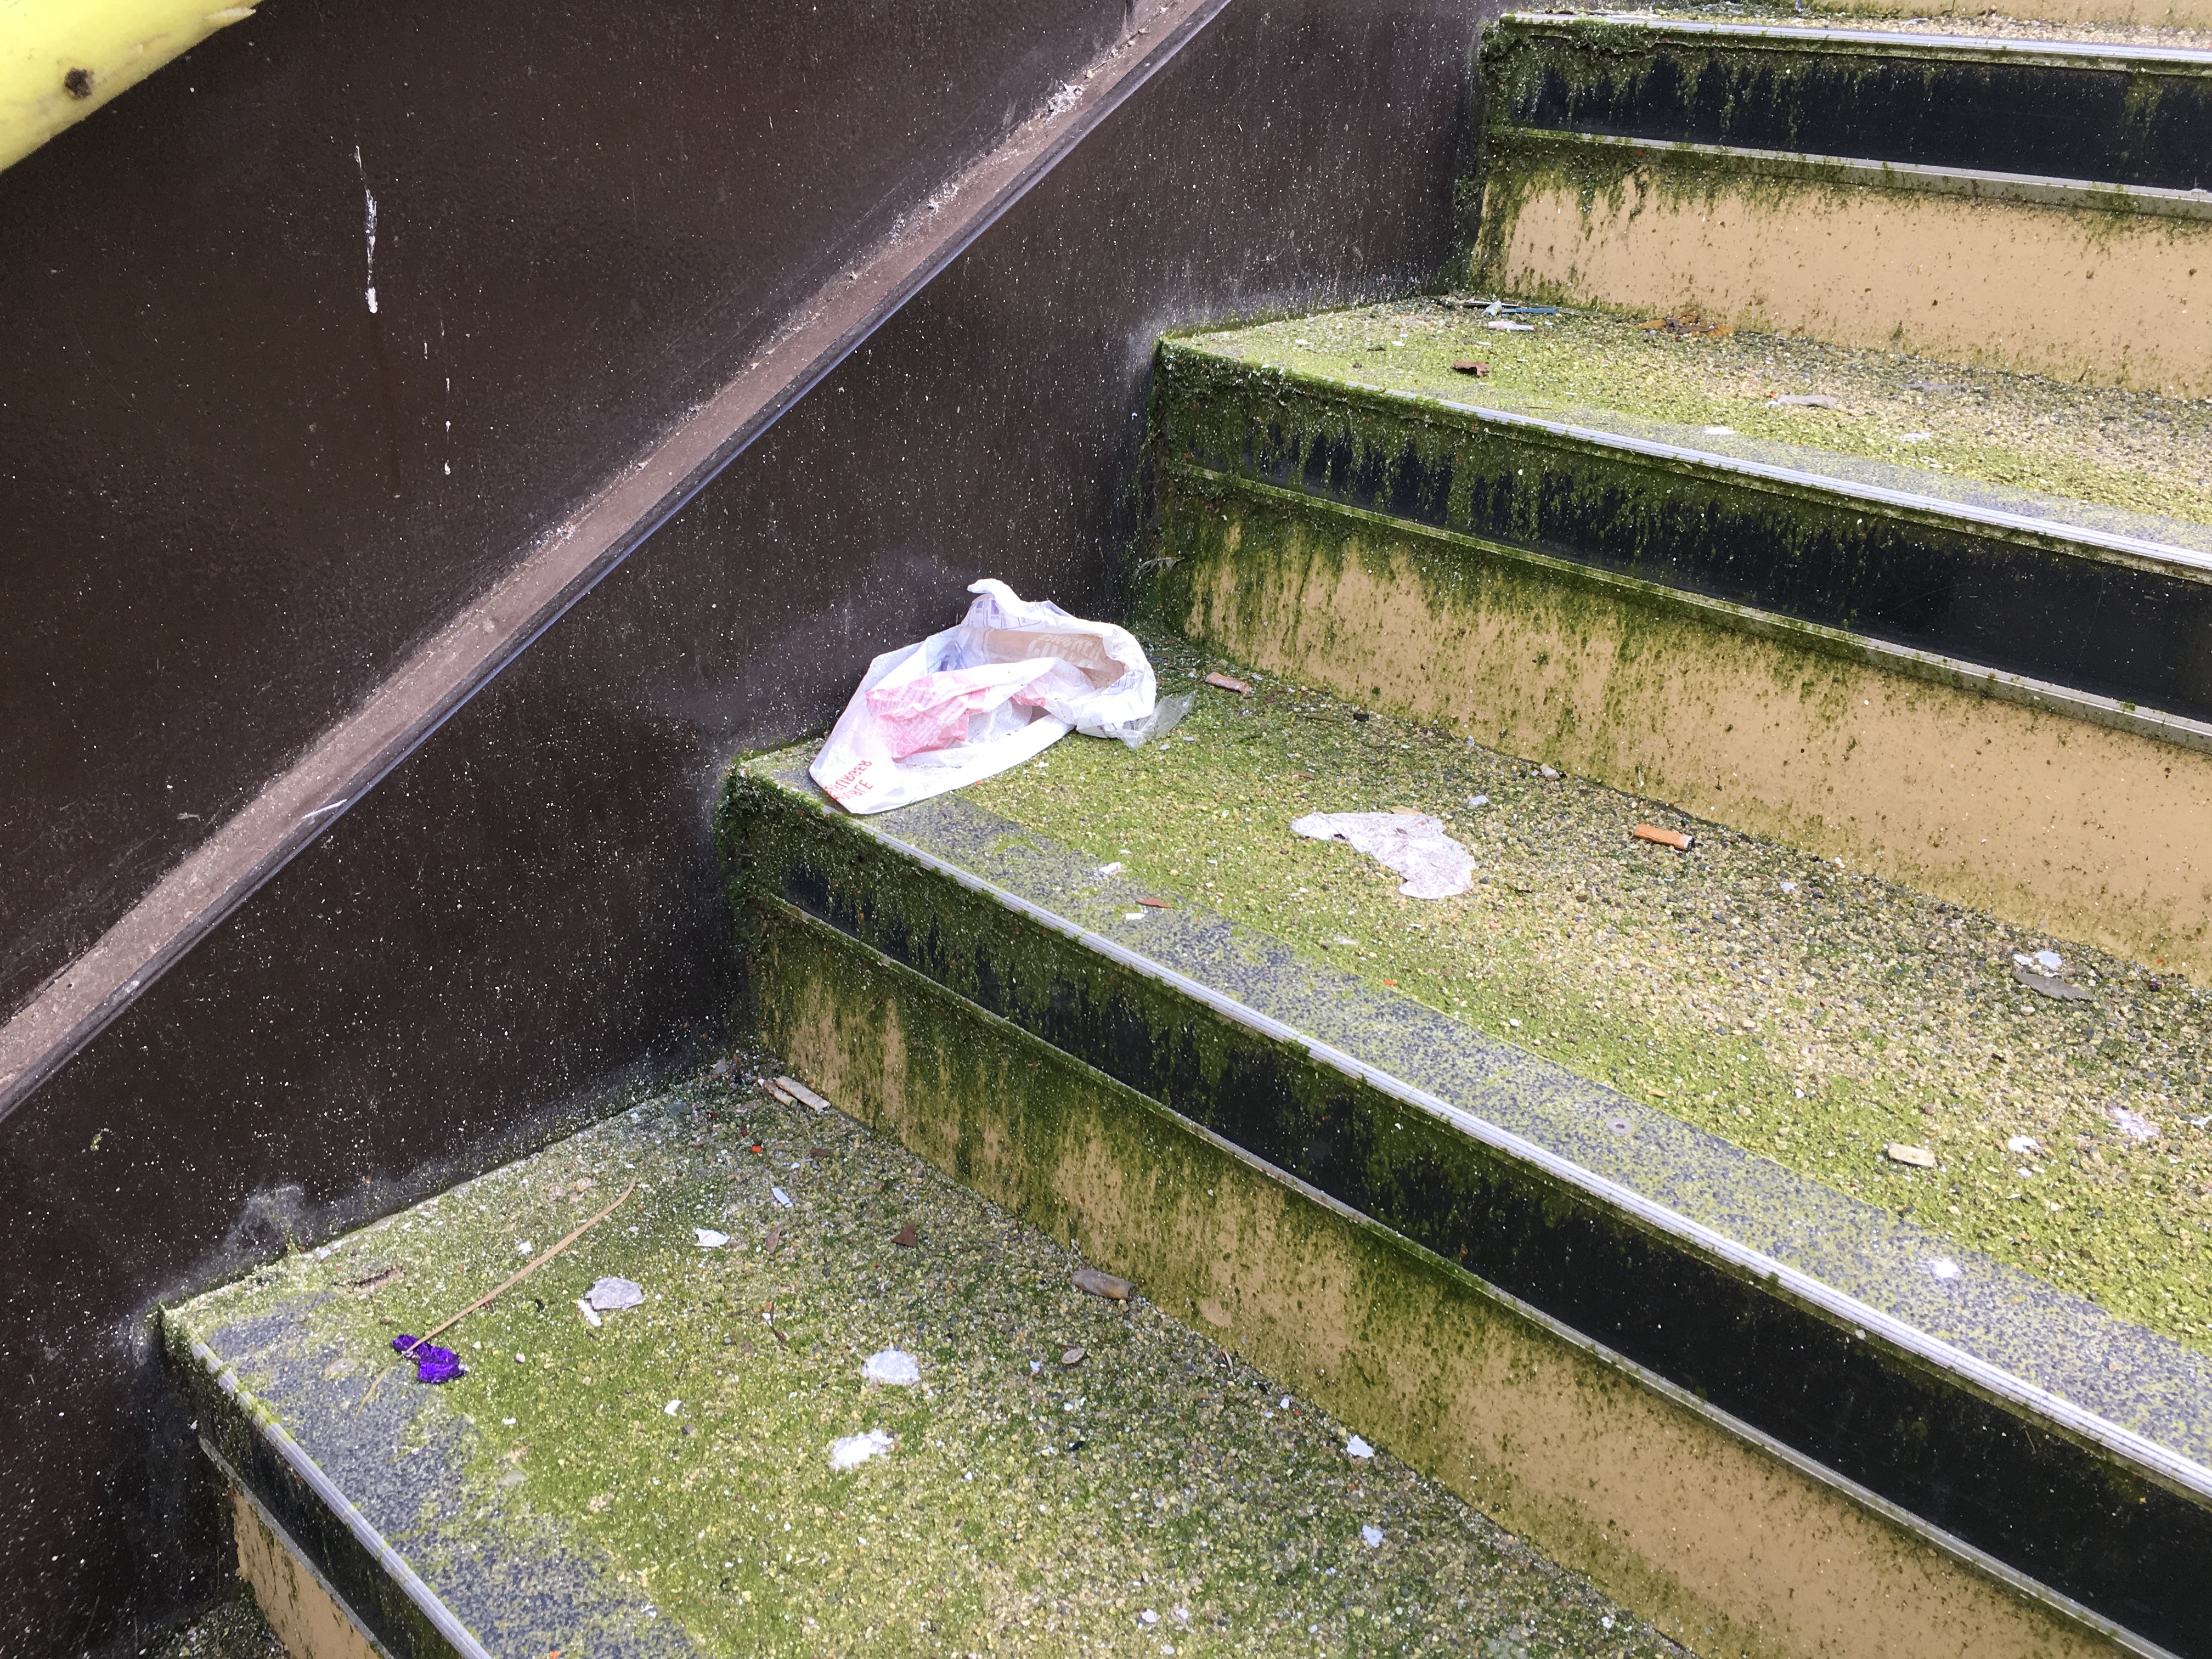 Litter has become a problem on the High Street footbridge